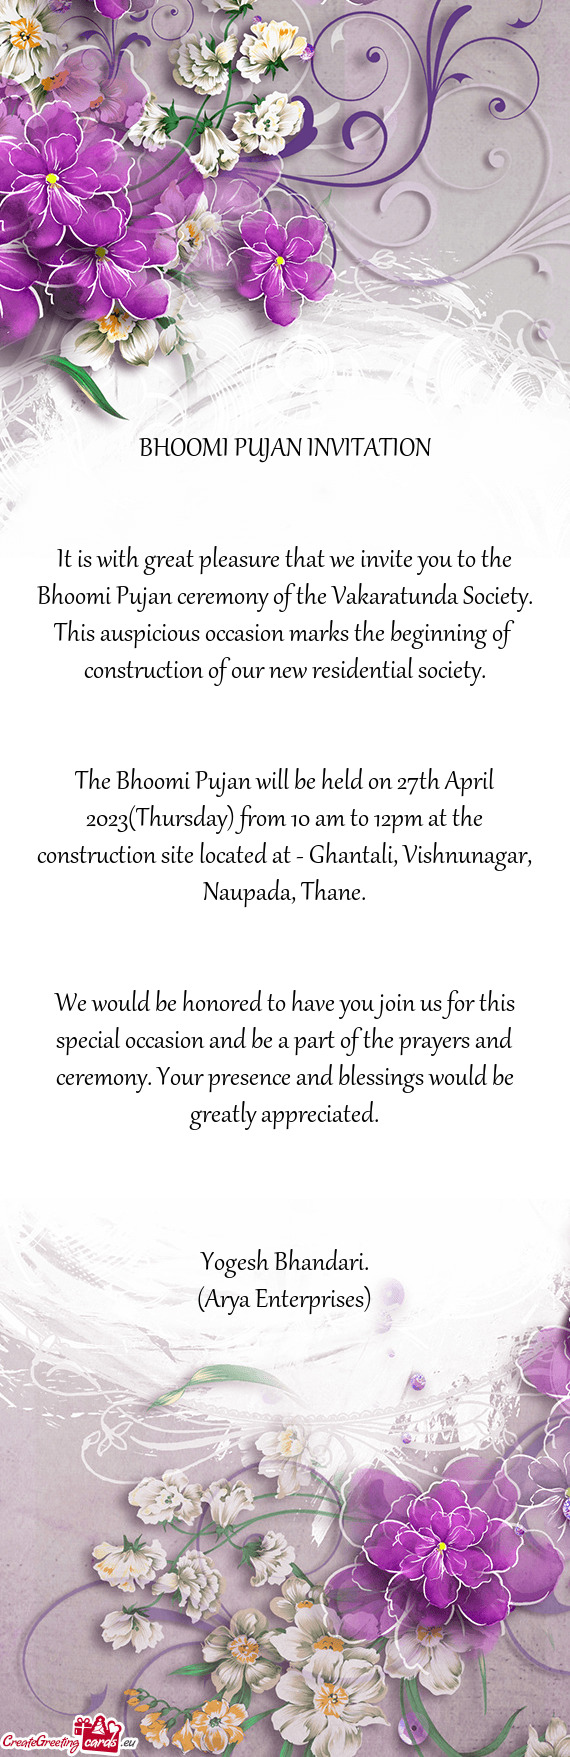 This auspicious occasion marks the beginning of construction of our new residential society